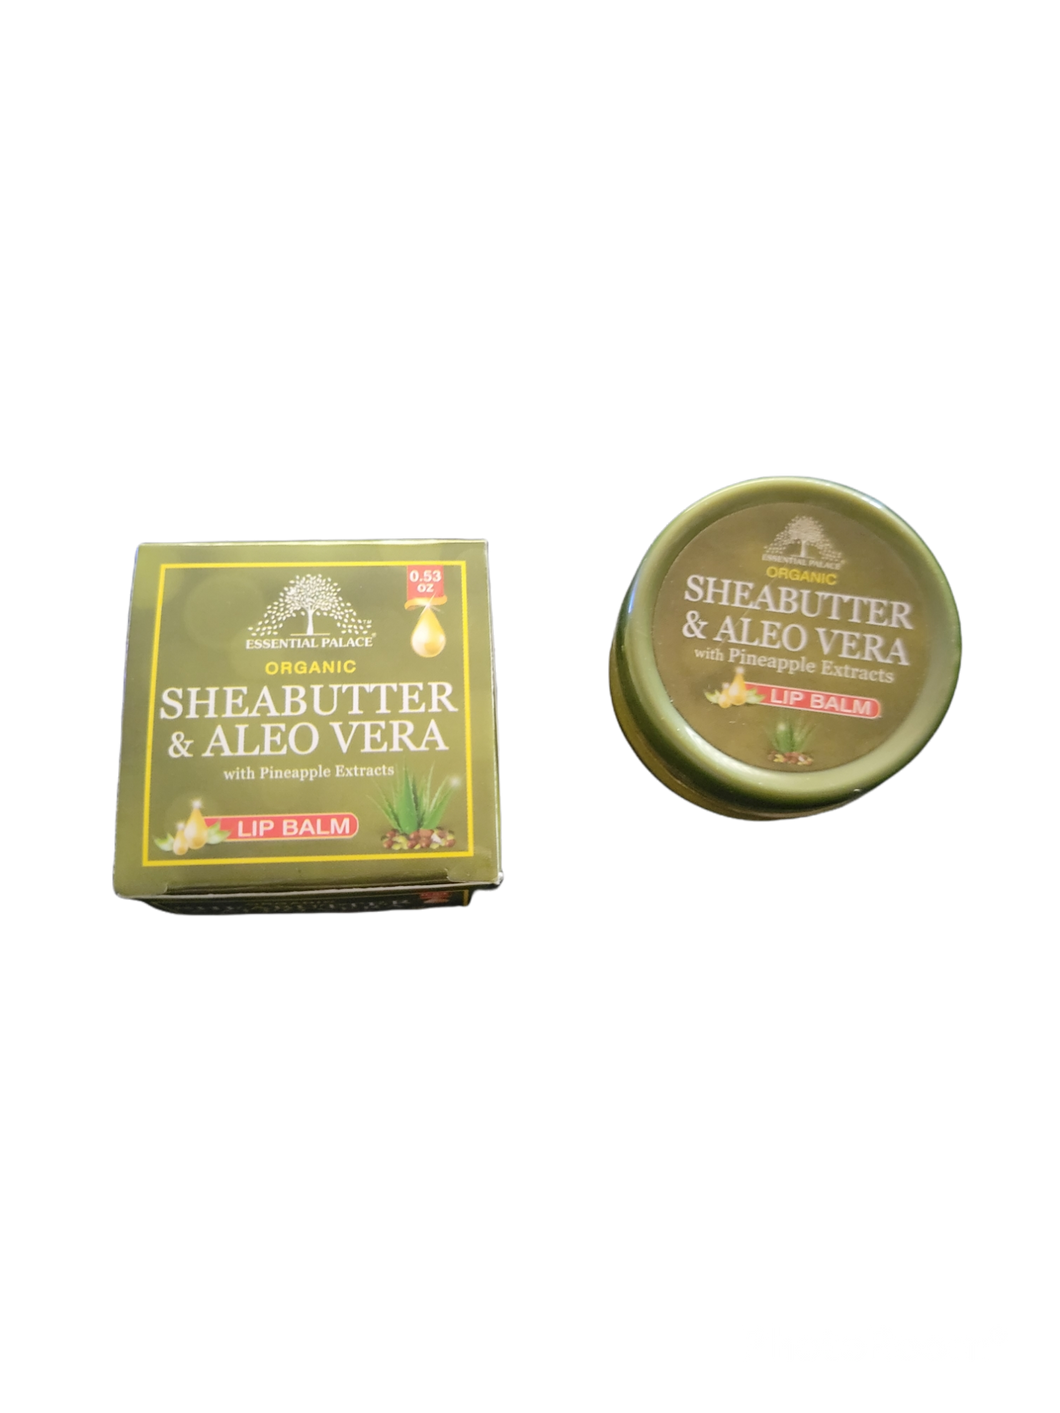 Shea Butter & Aleo Vera Lip Balm with Pineapple Extracts